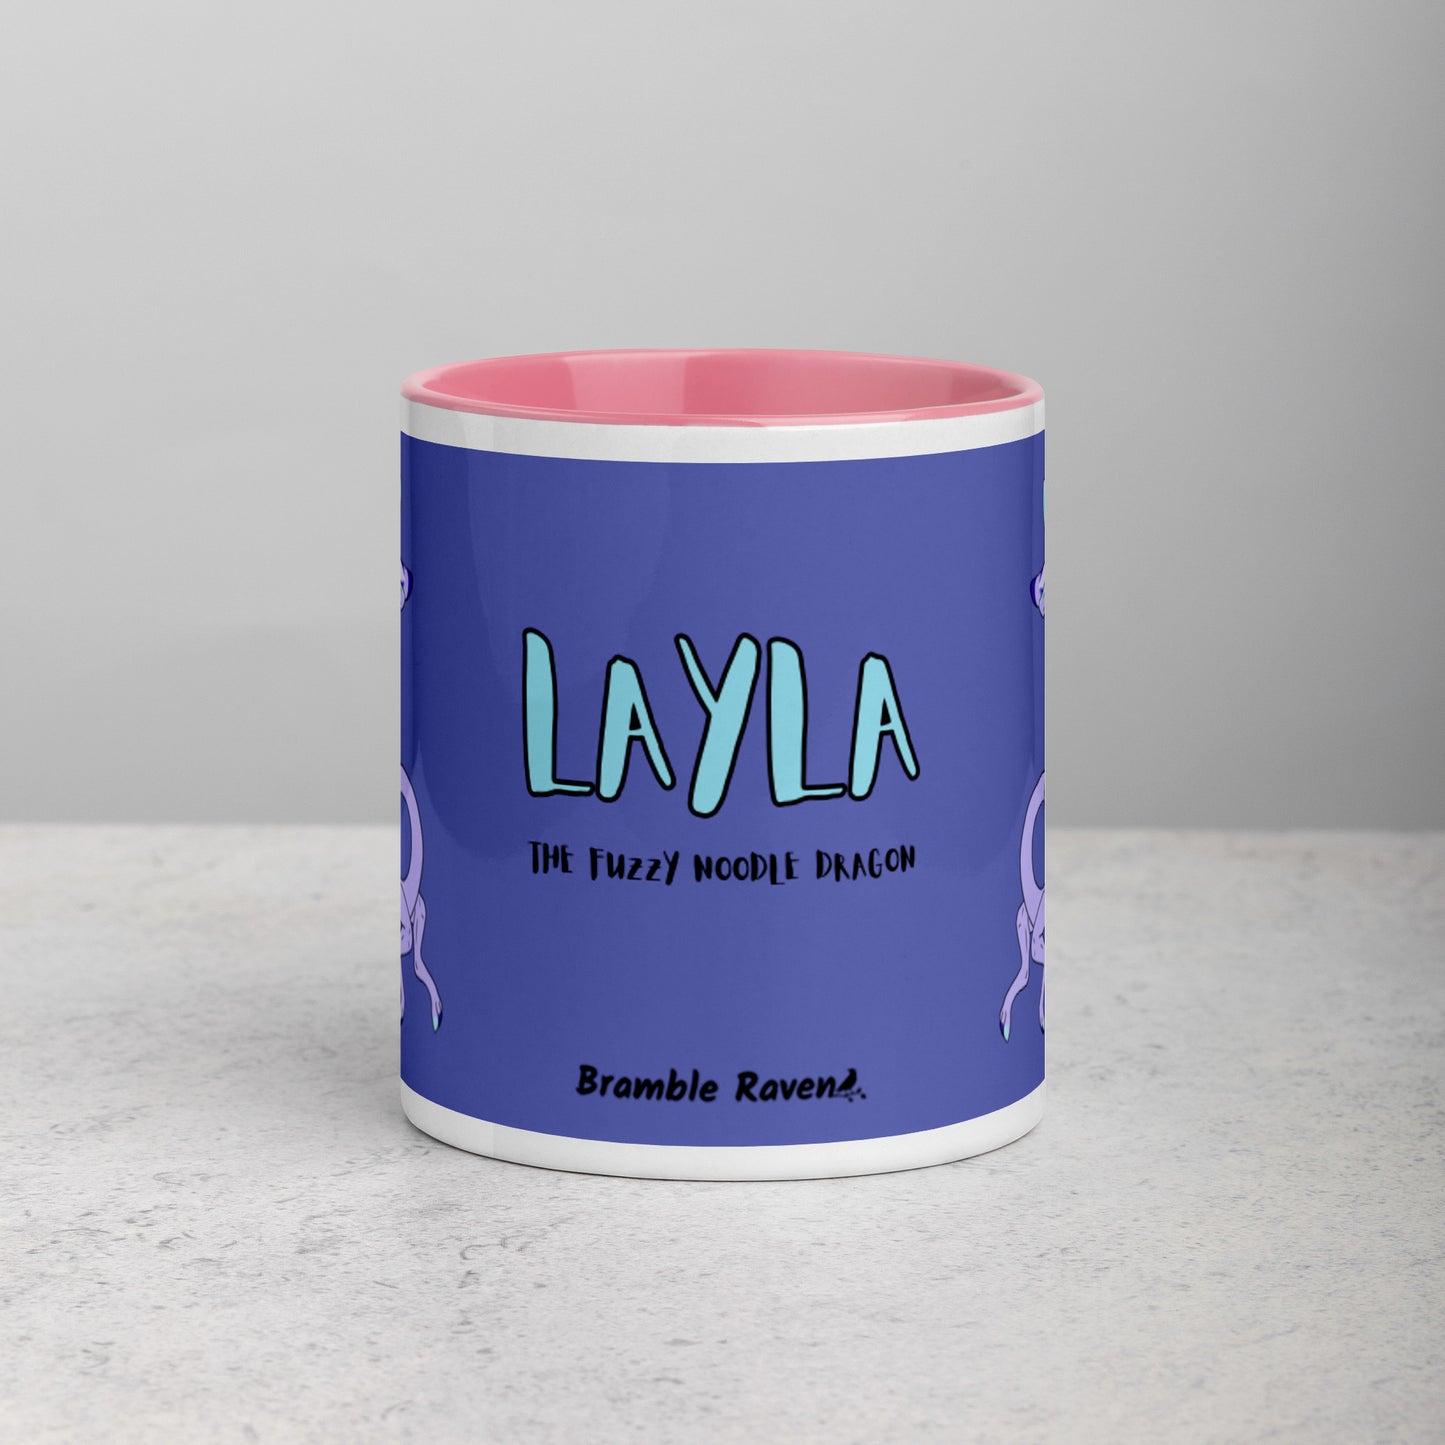 11 ounce white ceramic mug. Pink inside and handle. Features double-sided image of Layla the Lavender Fuzzy Noodle Dragon. Shown on tabletop. Front view shows Layla the Fuzzy Noodle Dragon text and Bramble Raven logo.